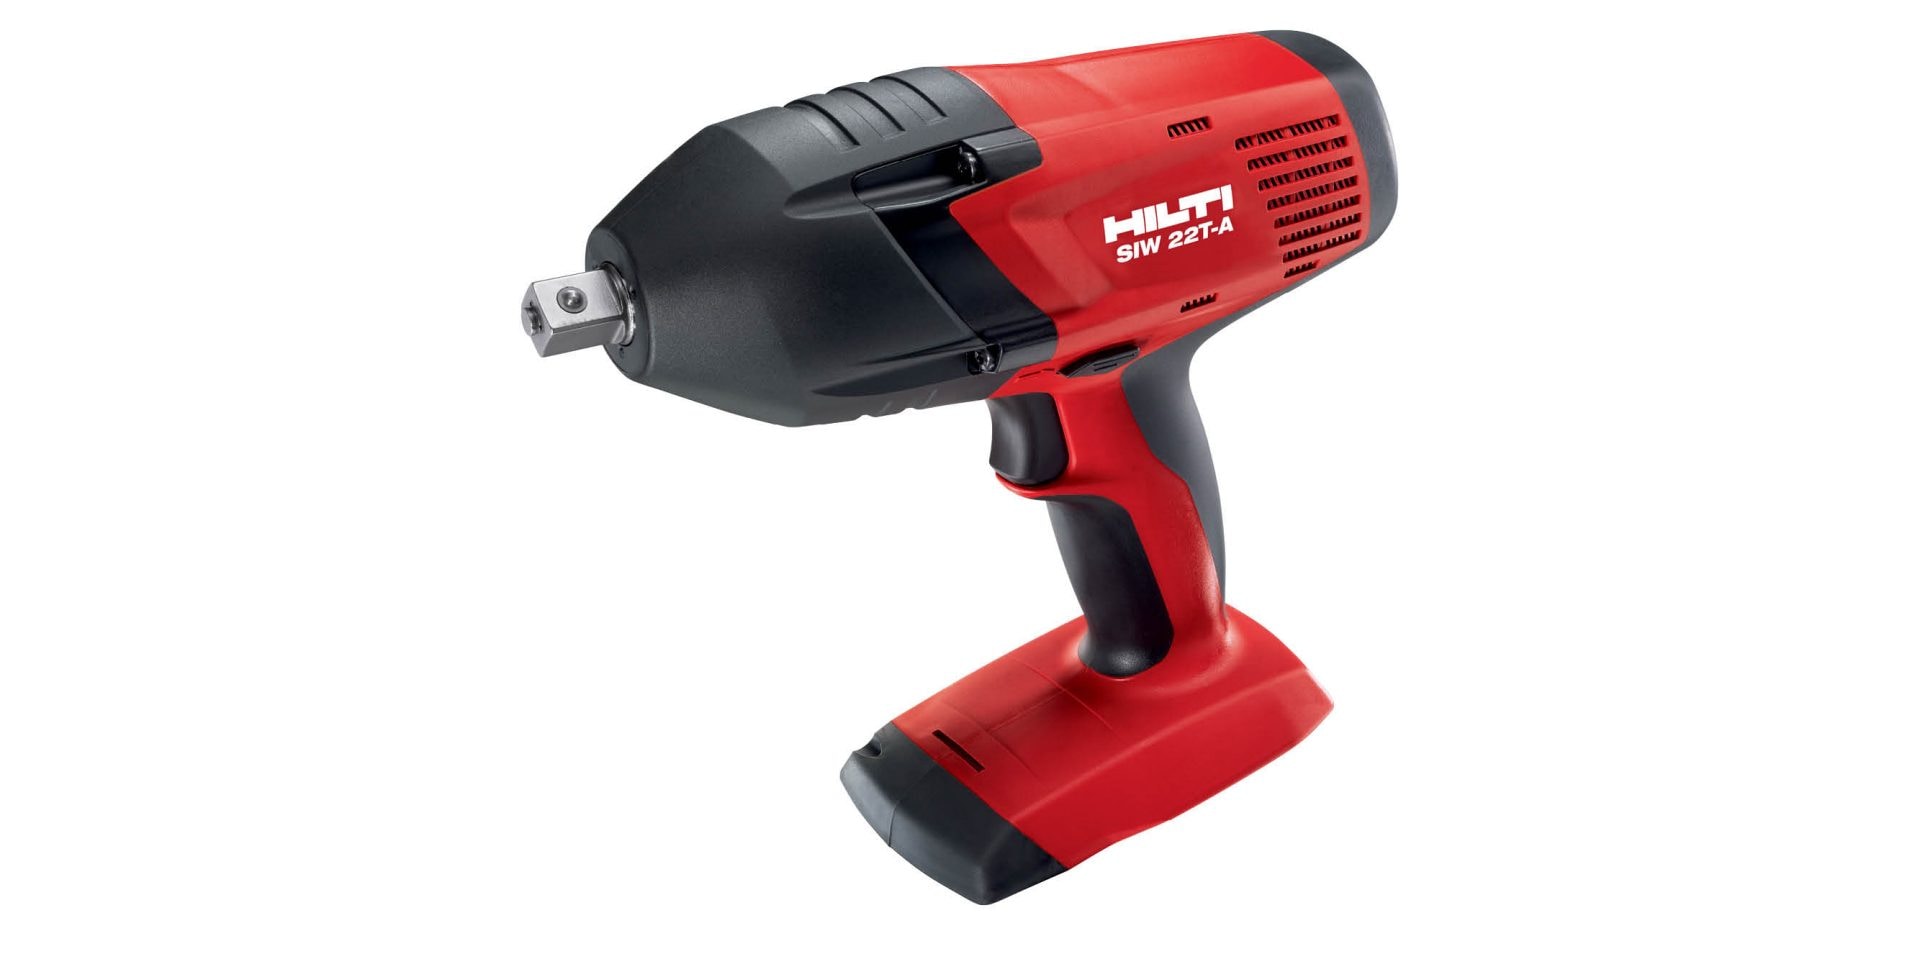 Cordless Impact Wrench SIW 22T-A 3/4" 